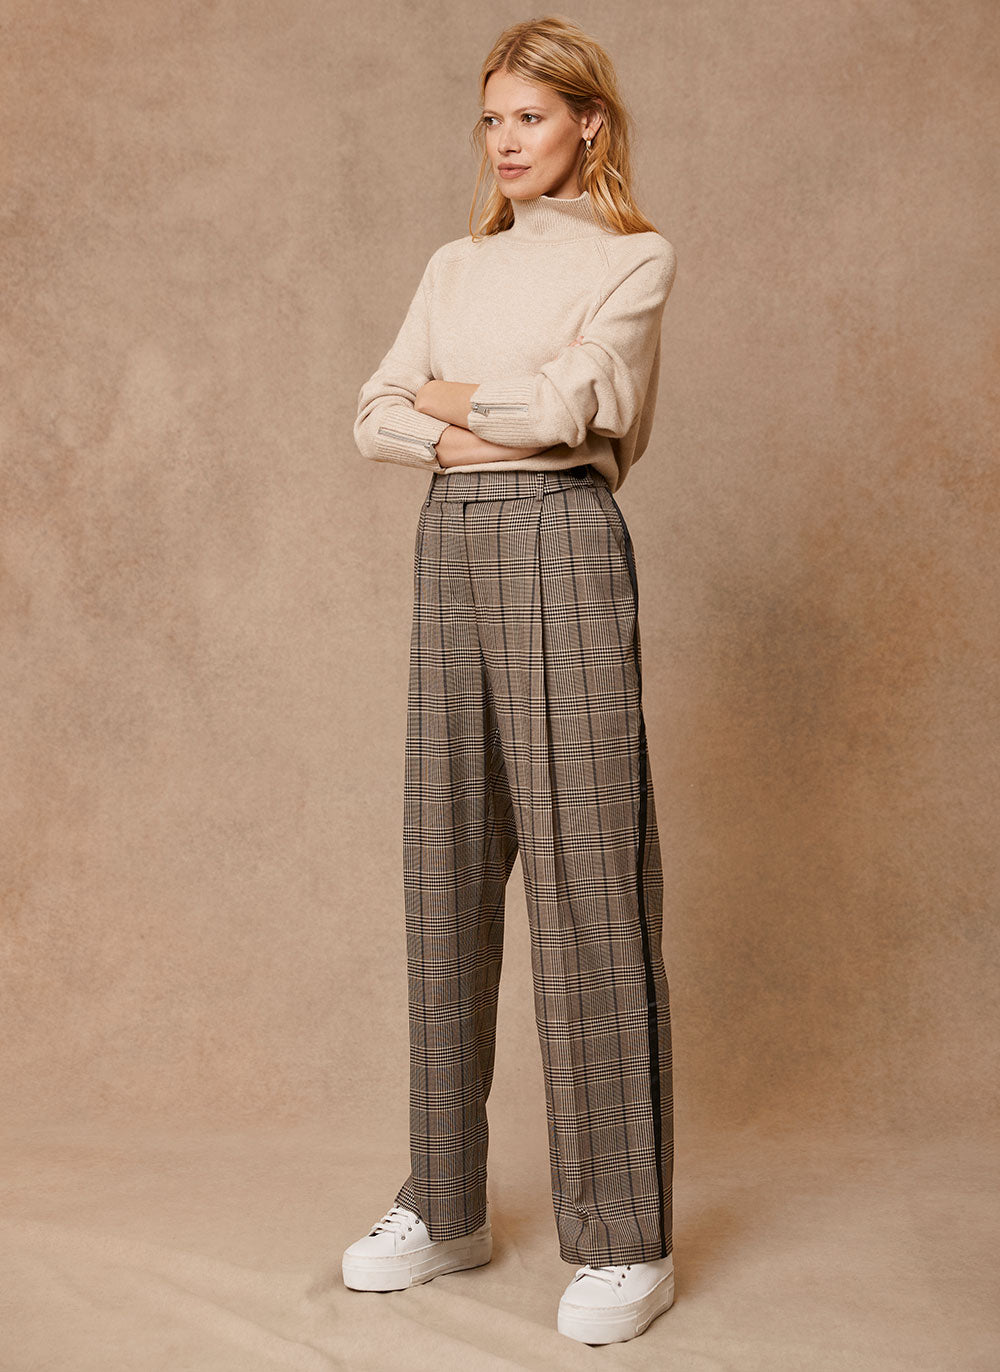 9 Simple Ways How To Style Plaid Pants For Women 2020  Plaid pants outfit  How to style plaid pants Plaid fashion